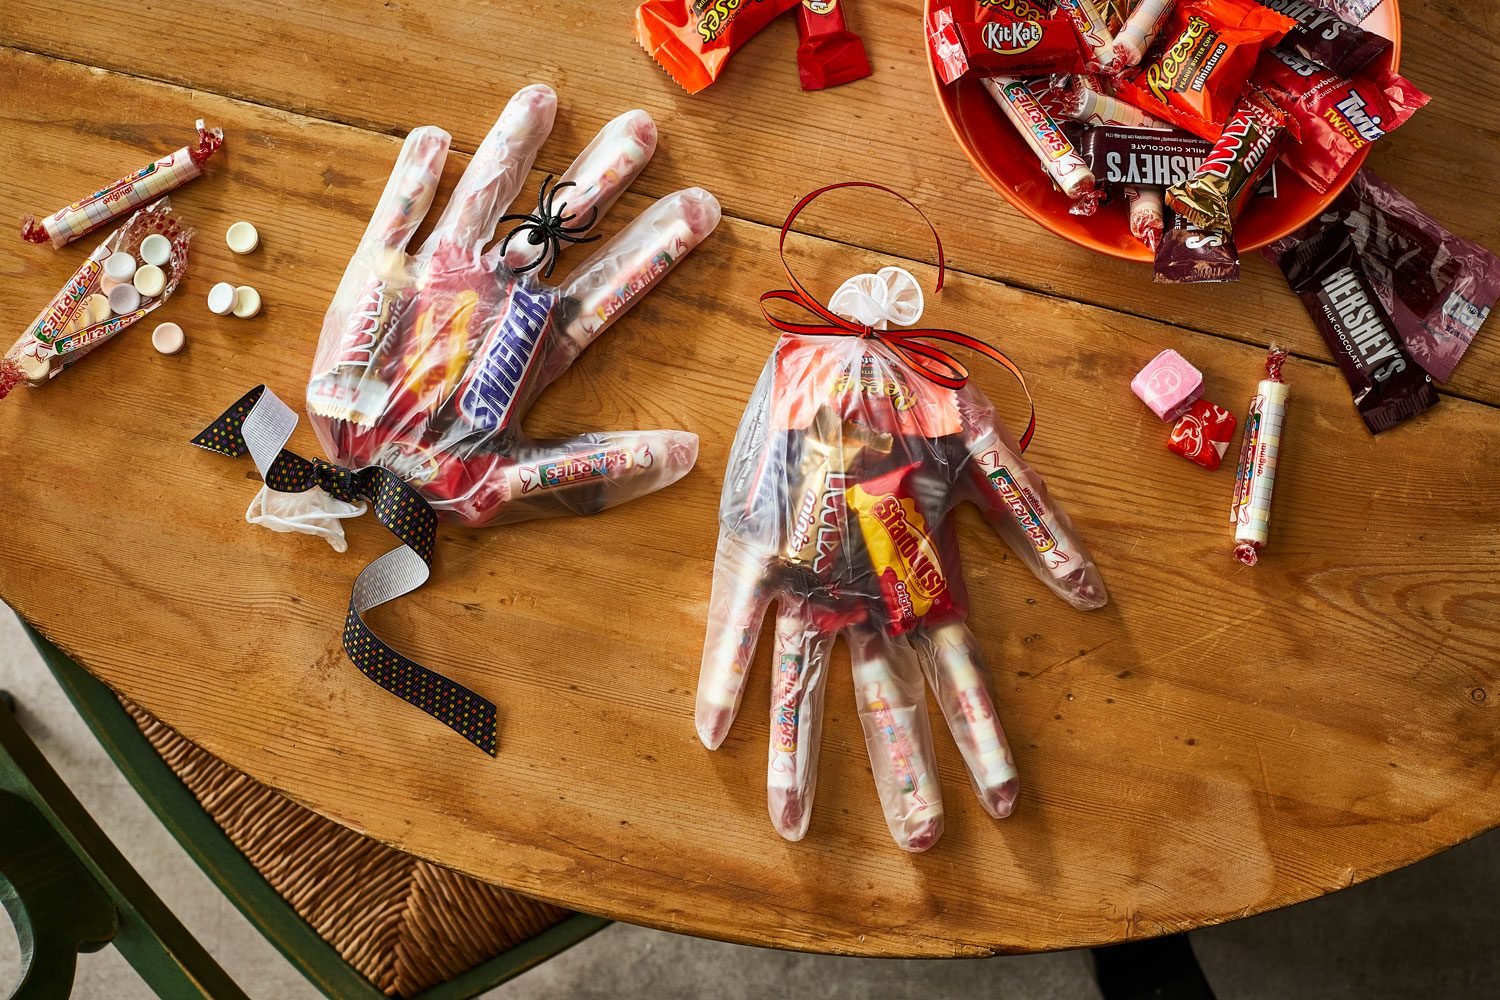 Too sweet, or not too sweet? Three experts on what to do with all the  Halloween lollies, Halloween